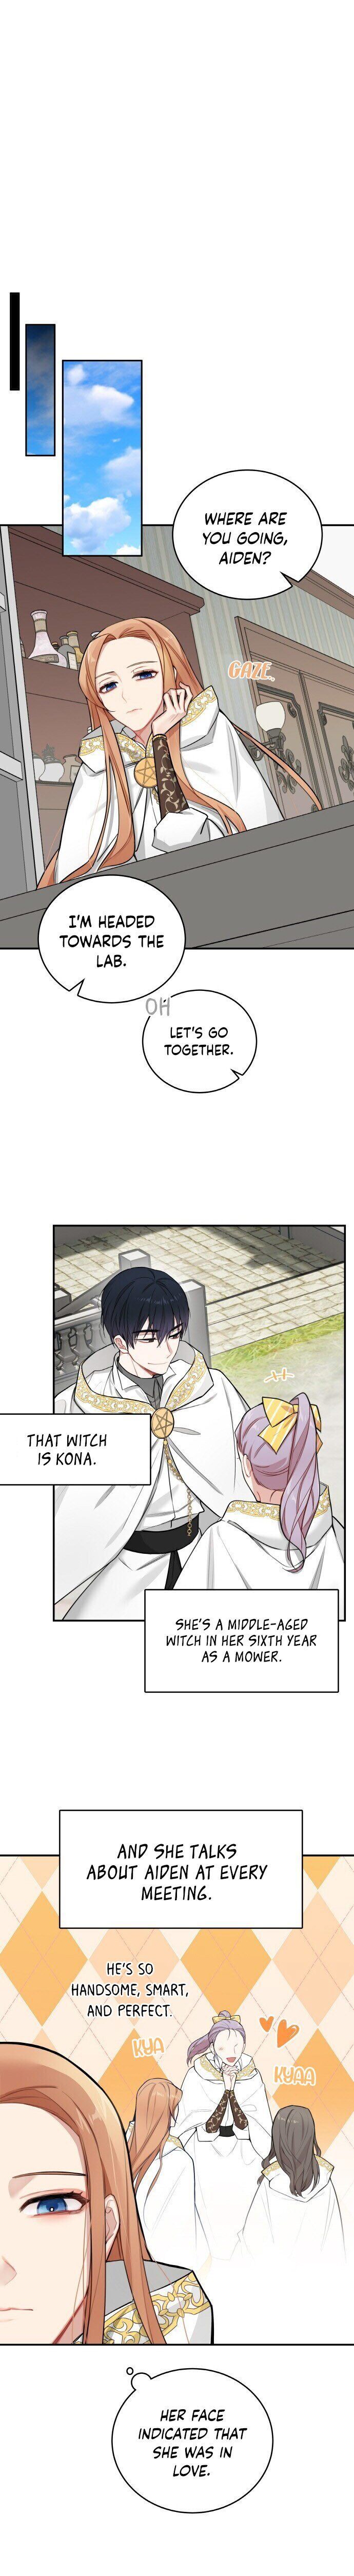 The Newlywed life of a Witch and a Dragon Ch.001 page 15 - MangaWeebs.in